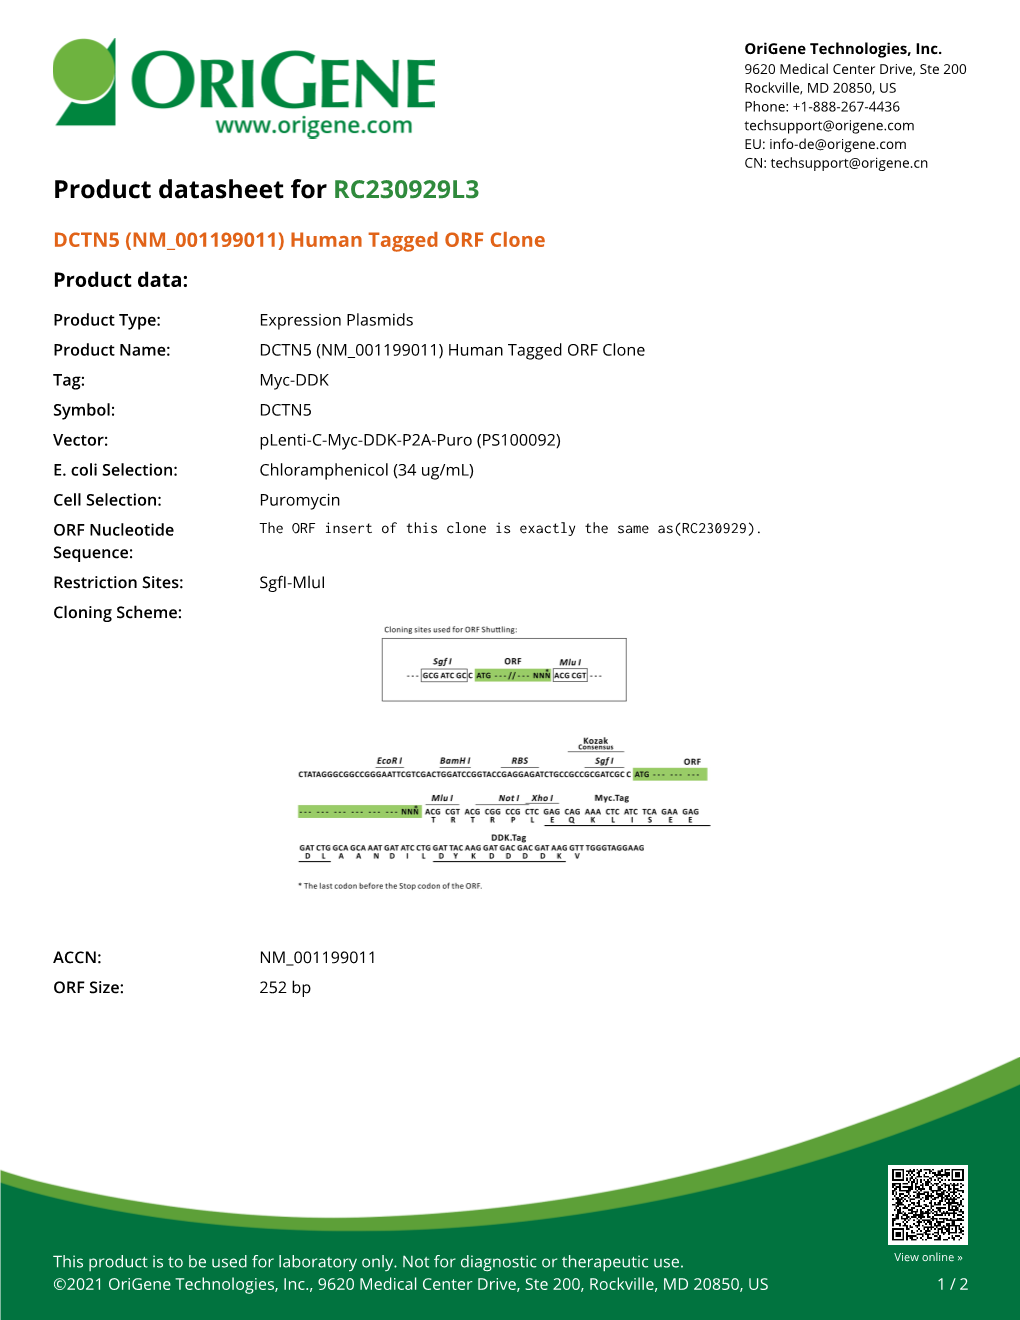 DCTN5 (NM 001199011) Human Tagged ORF Clone Product Data